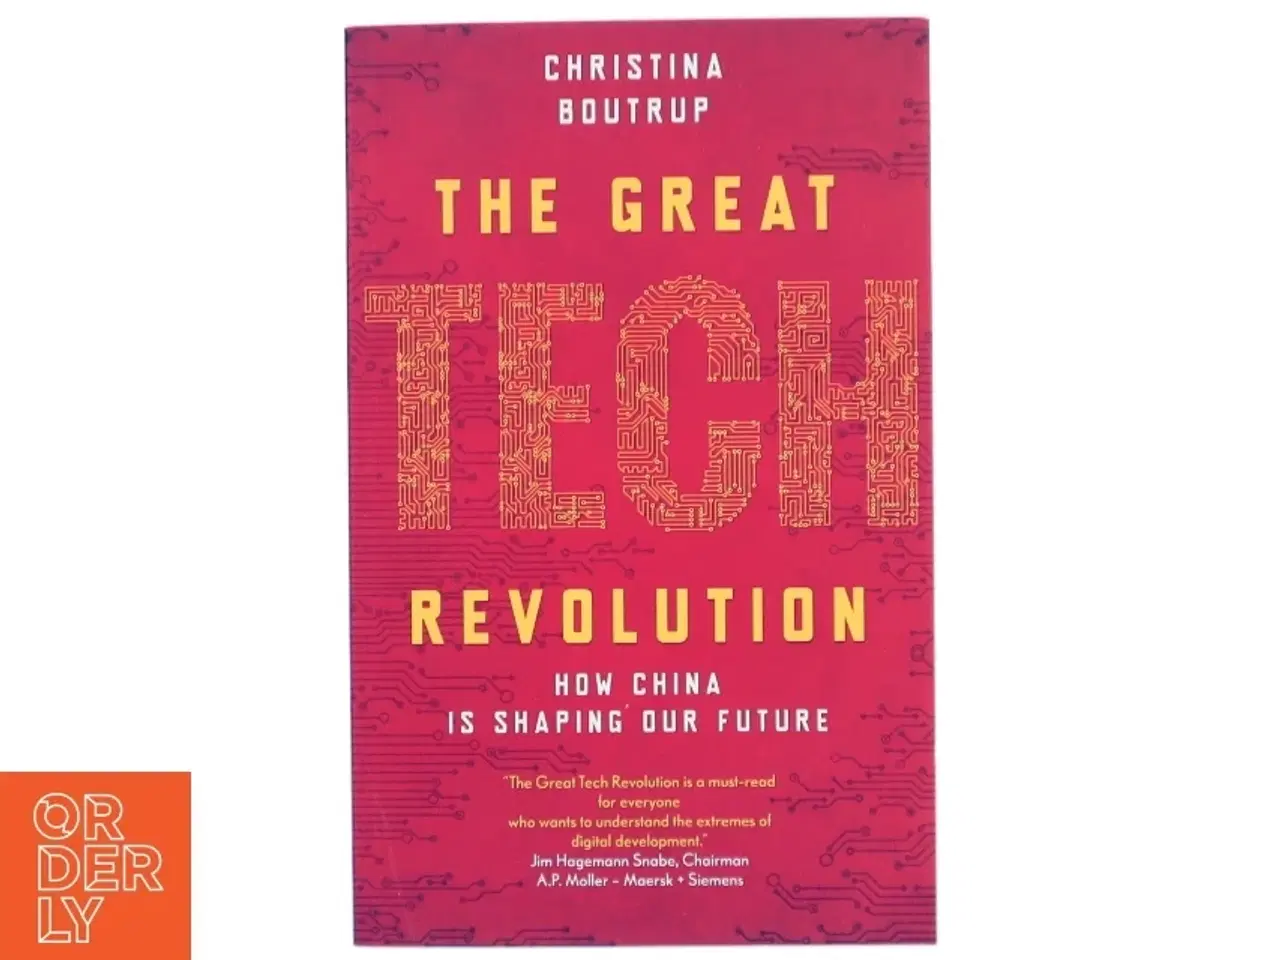 Billede 1 - The great tech revolution : how China is shaping our future af Christina Boutrup (Bog)